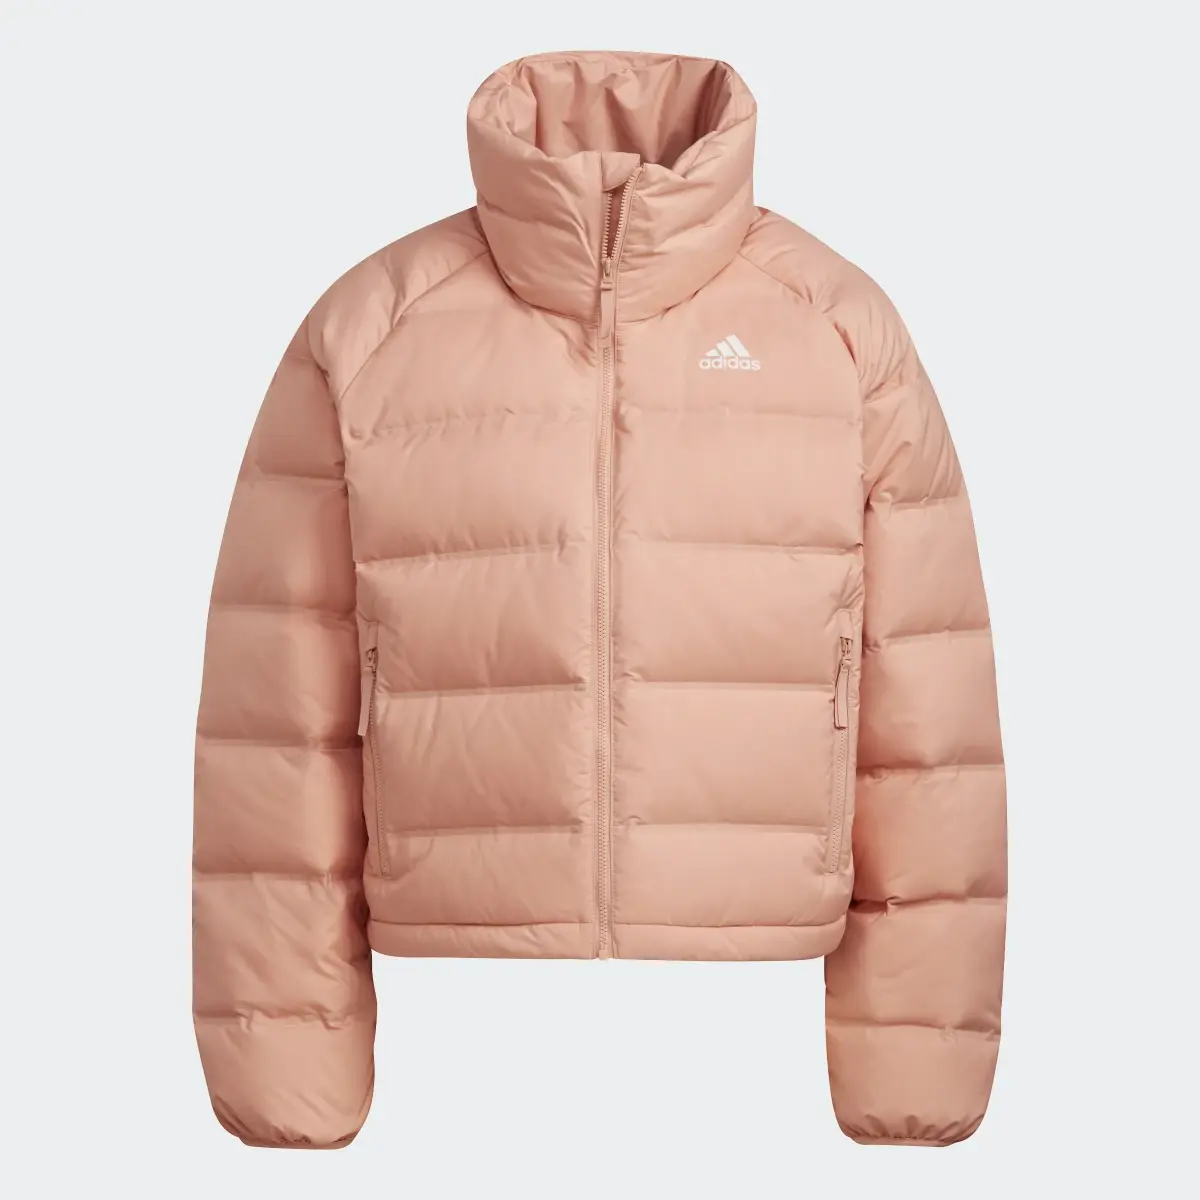 Adidas Helionic Relaxed Fit Down Jacket. 1